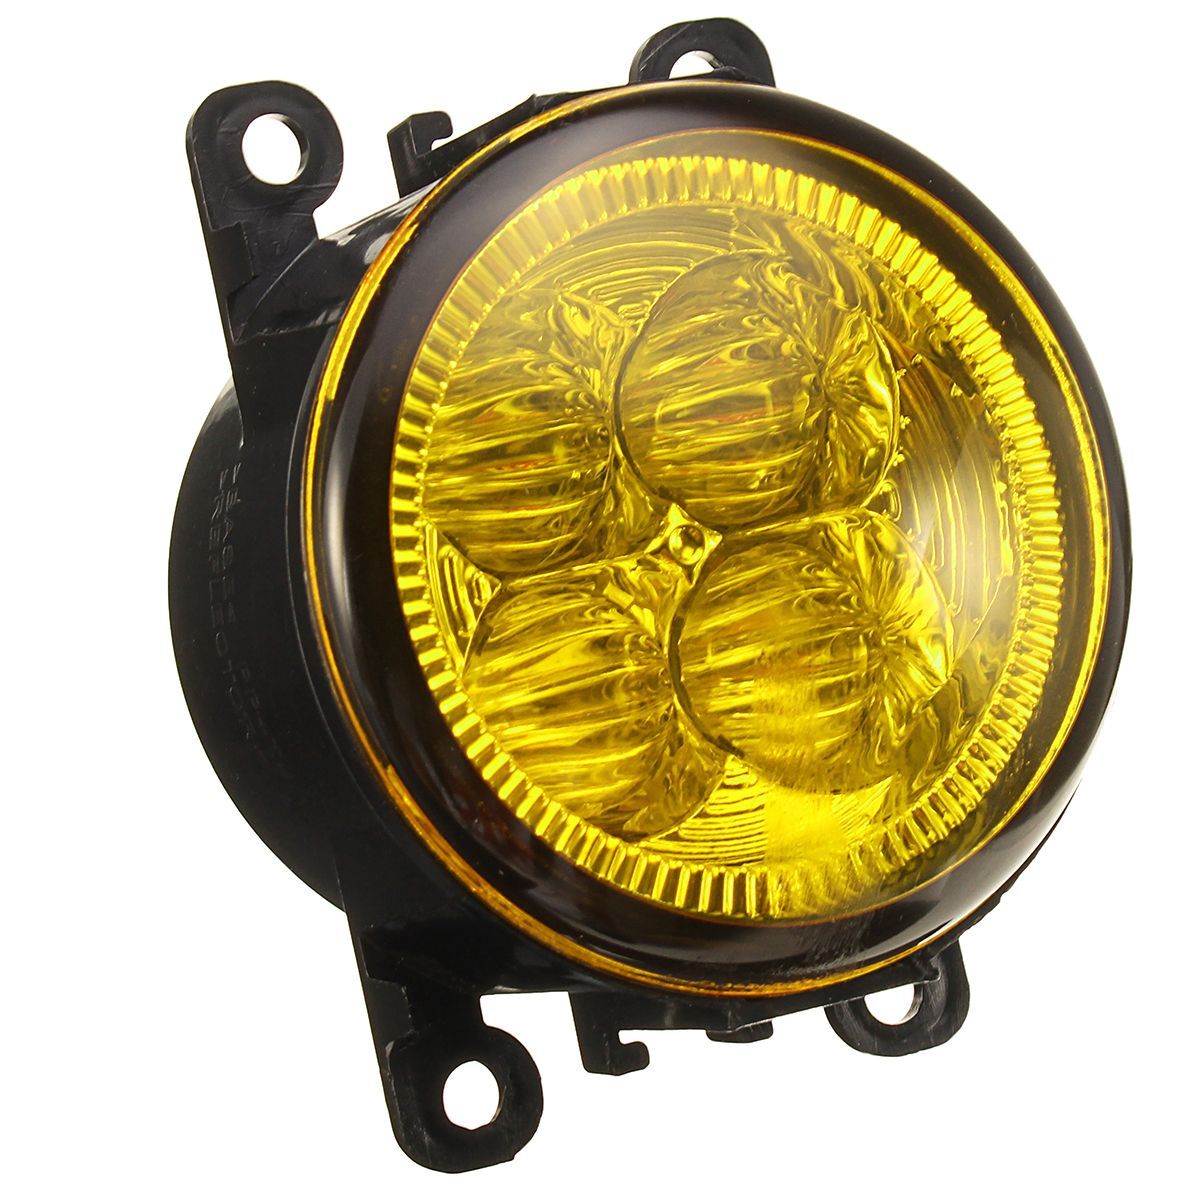 Pair-Car-Fog-Lights-Lamp-with-LED-Bulb-12W-Yellow-for-FordHondaAcuraNissanSuzuki-1364324